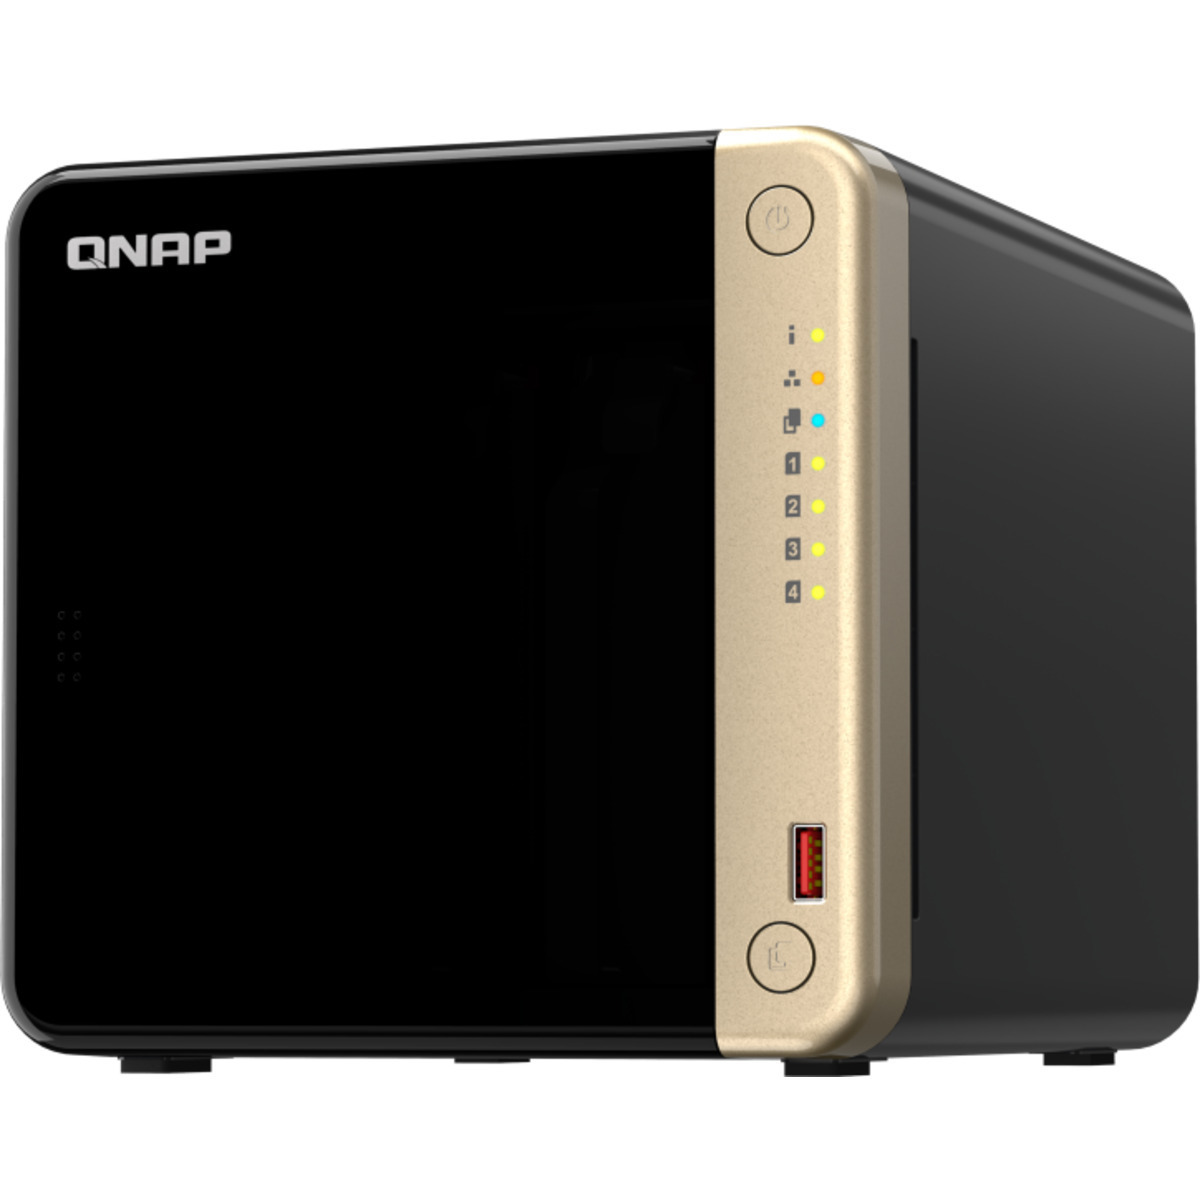 QNAP TS-464 54tb 4-Bay Desktop Multimedia / Power User / Business NAS - Network Attached Storage Device 3x18tb Western Digital Red Pro WD181KFGX 3.5 7200rpm SATA 6Gb/s HDD NAS Class Drives Installed - Burn-In Tested TS-464